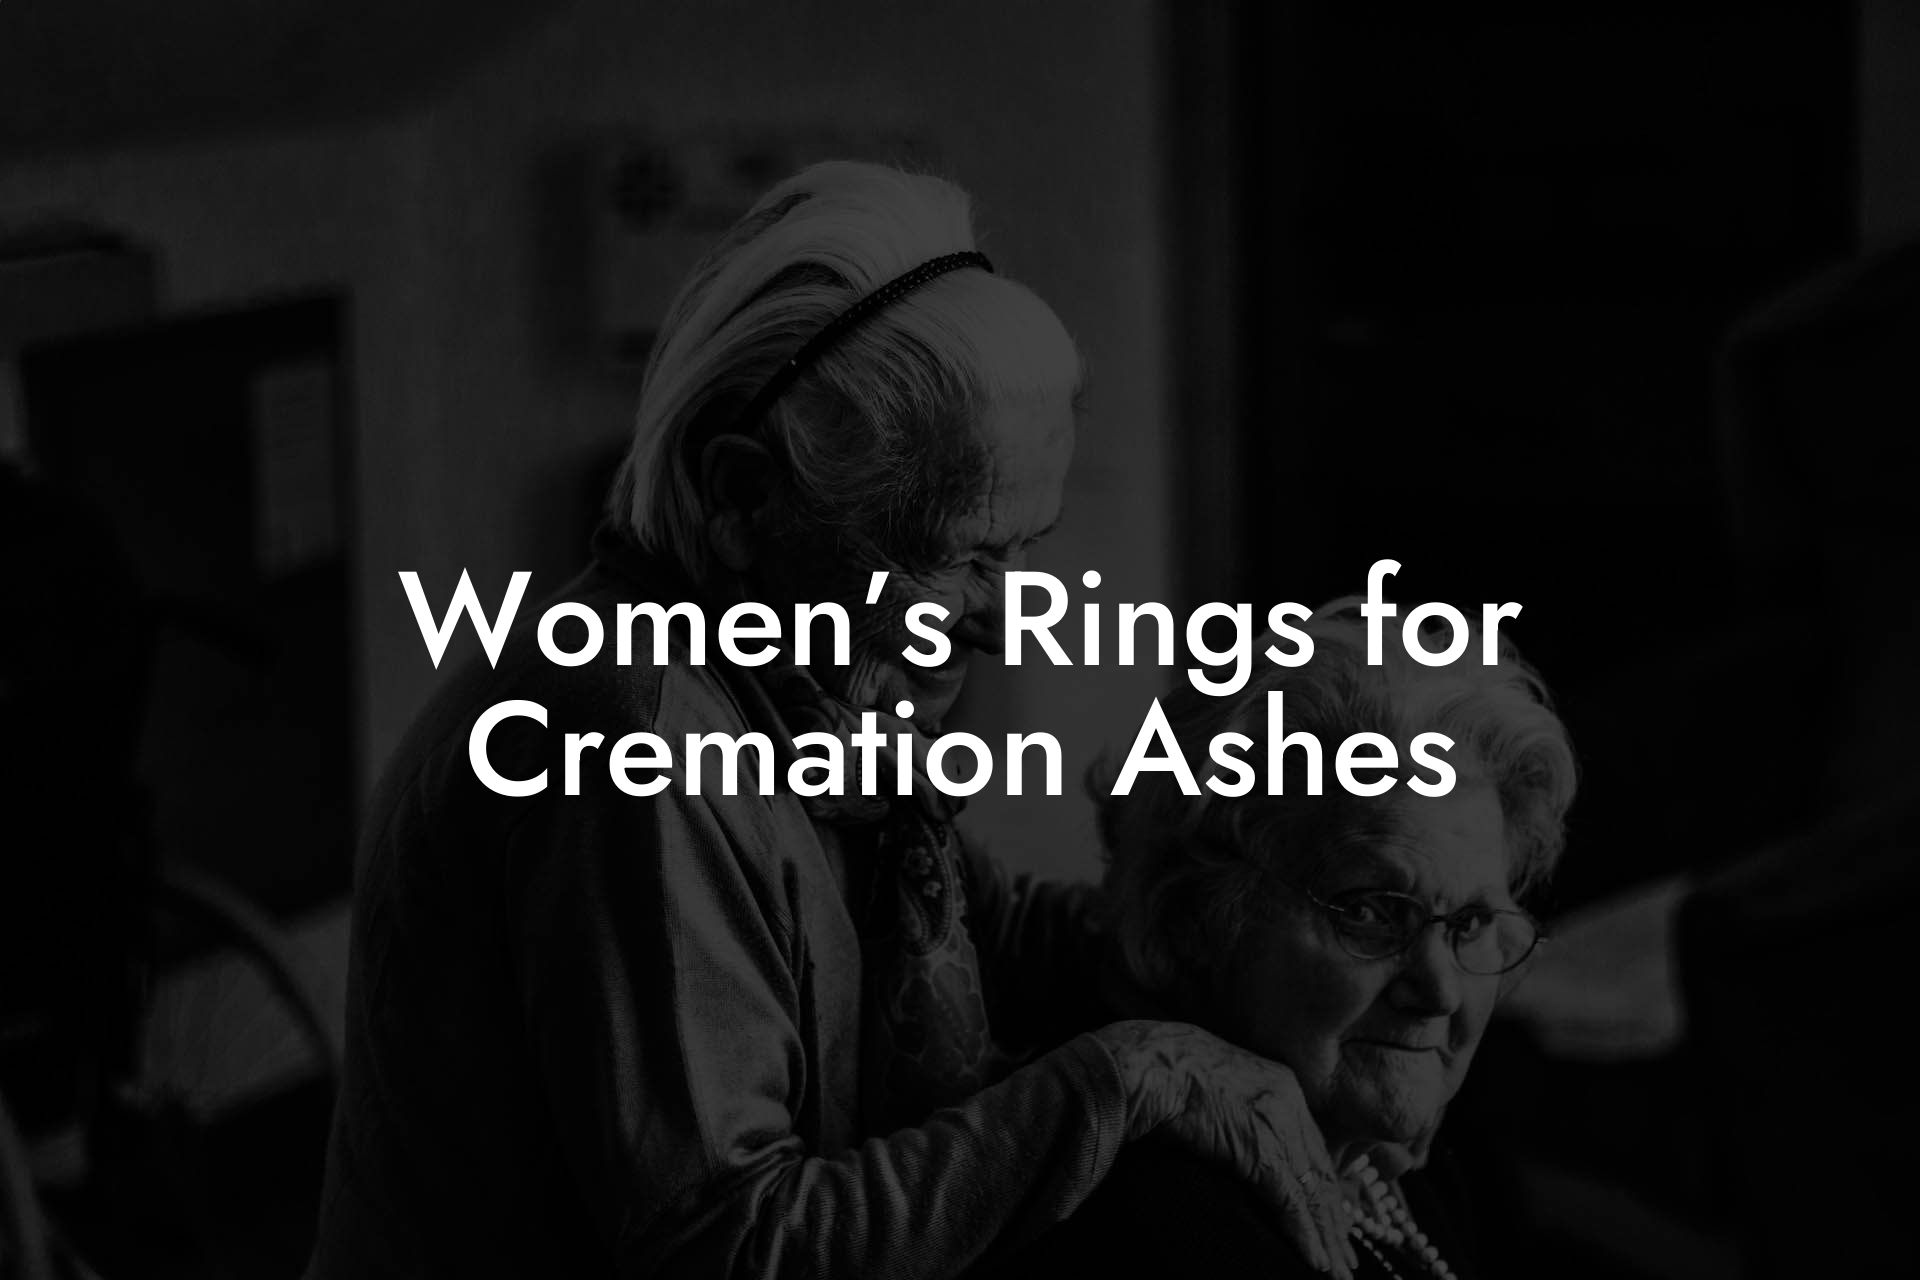 Women’s Rings for Cremation Ashes